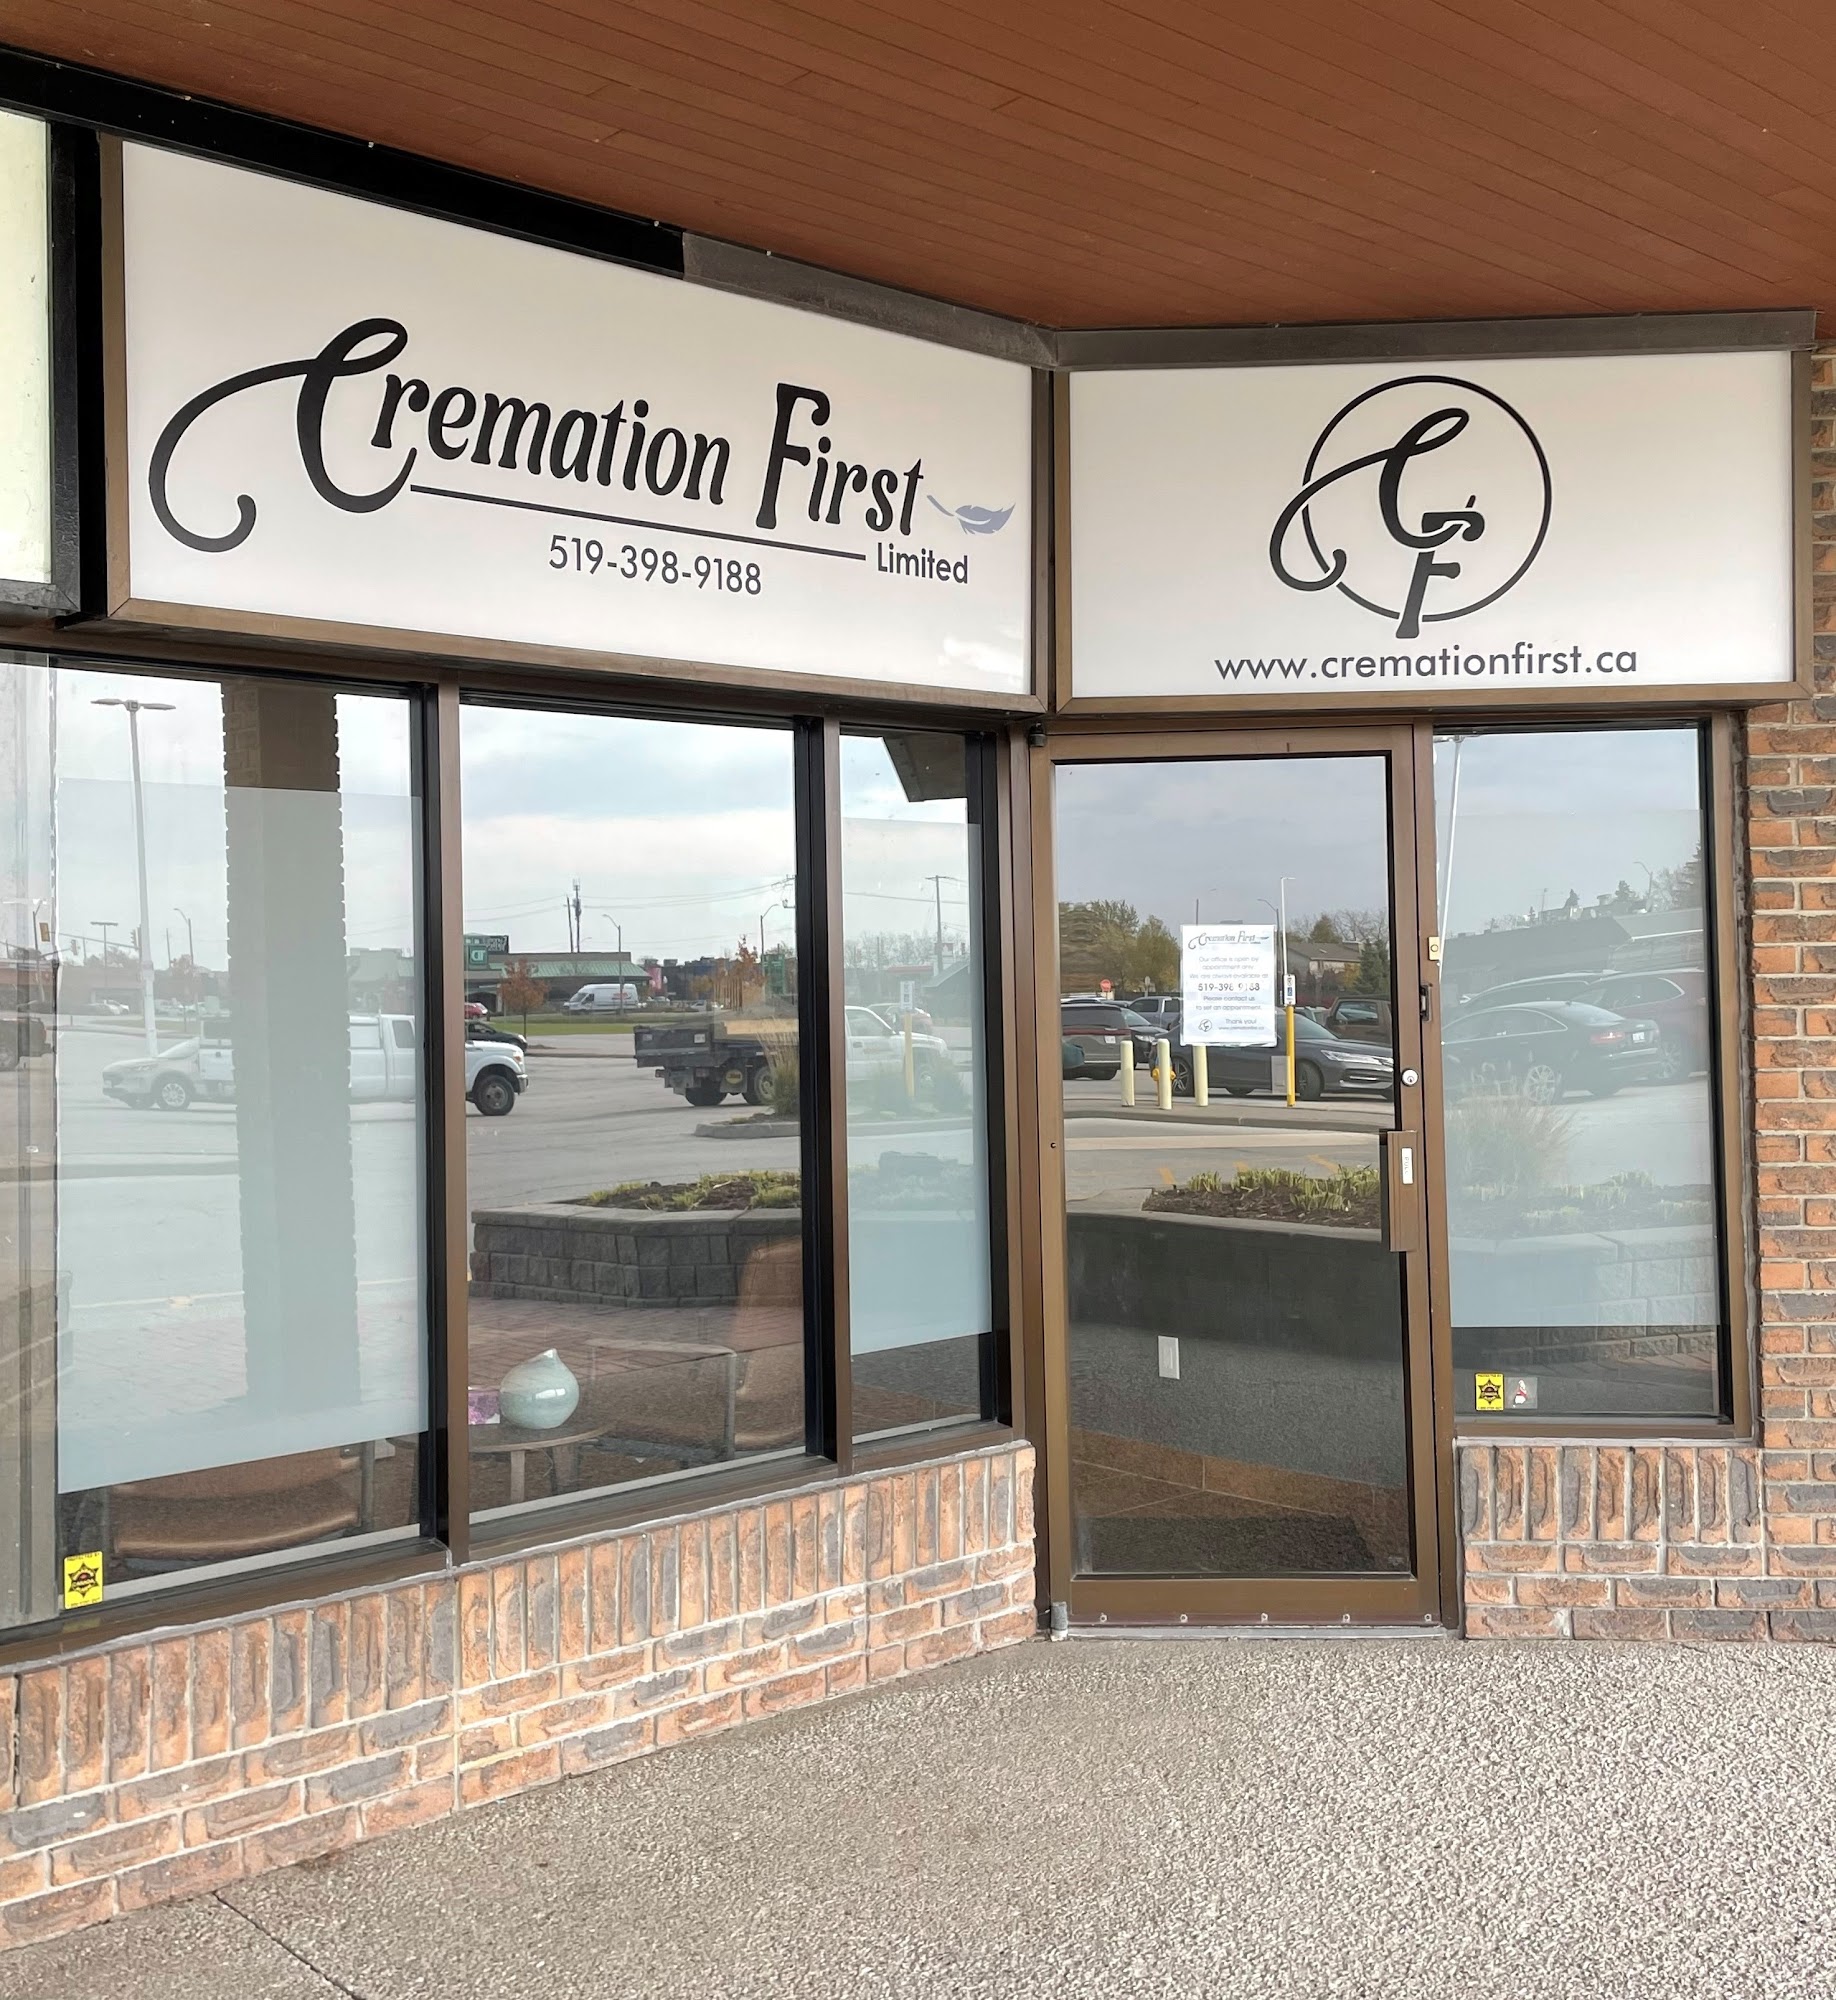 Cremation First Limited